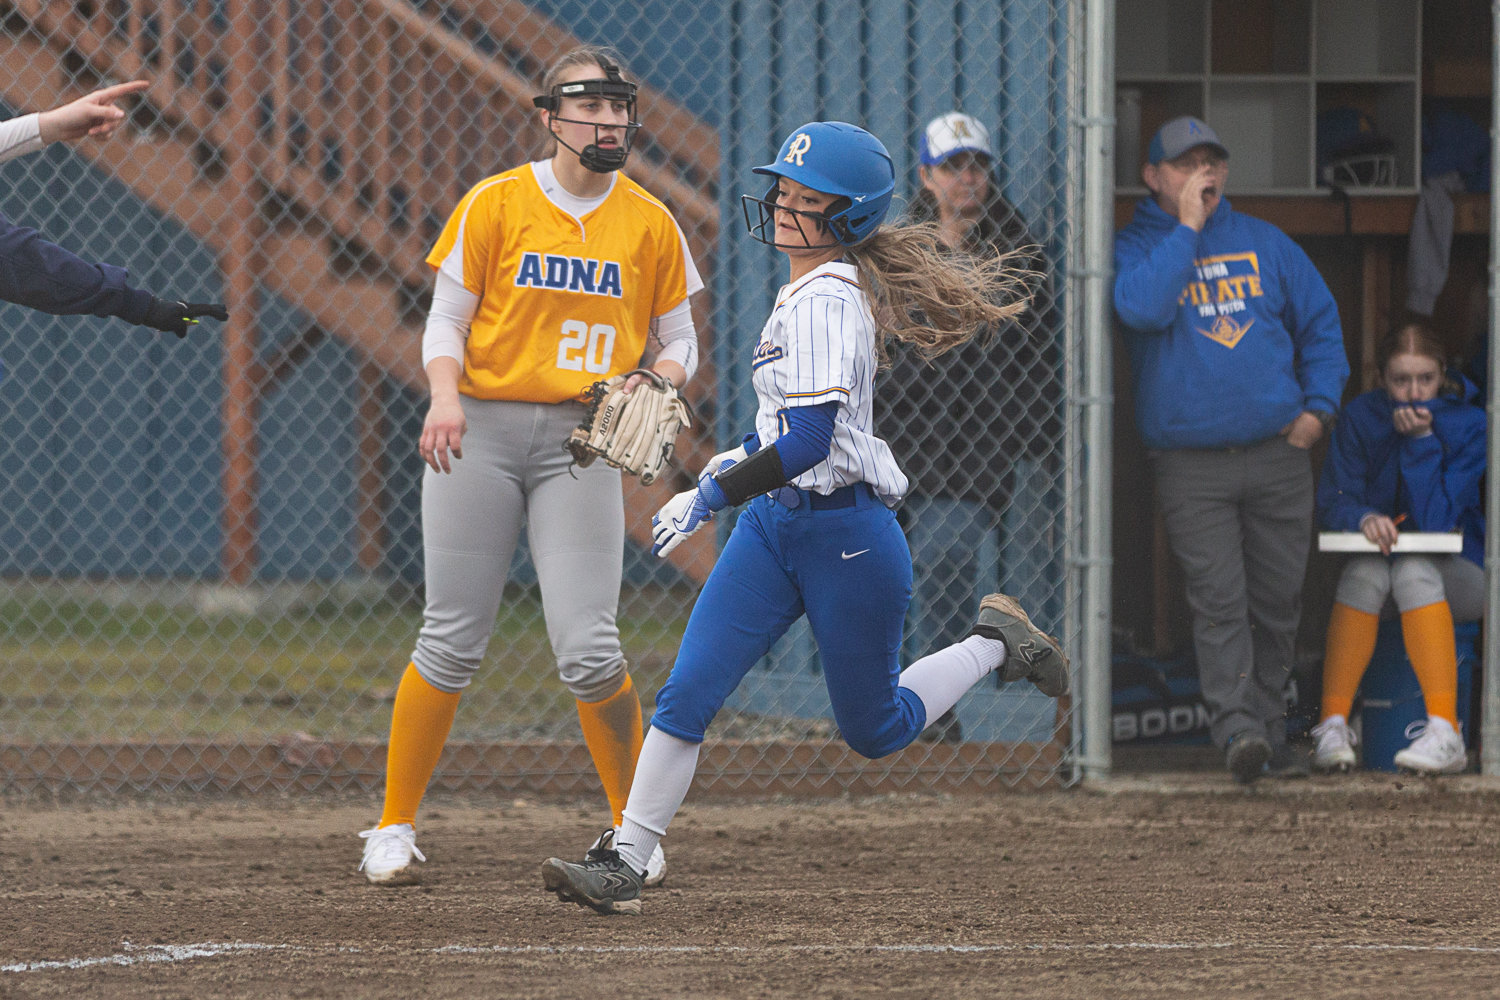 Rochester's Kaylee Demers runs across home plate against Adna March 15.